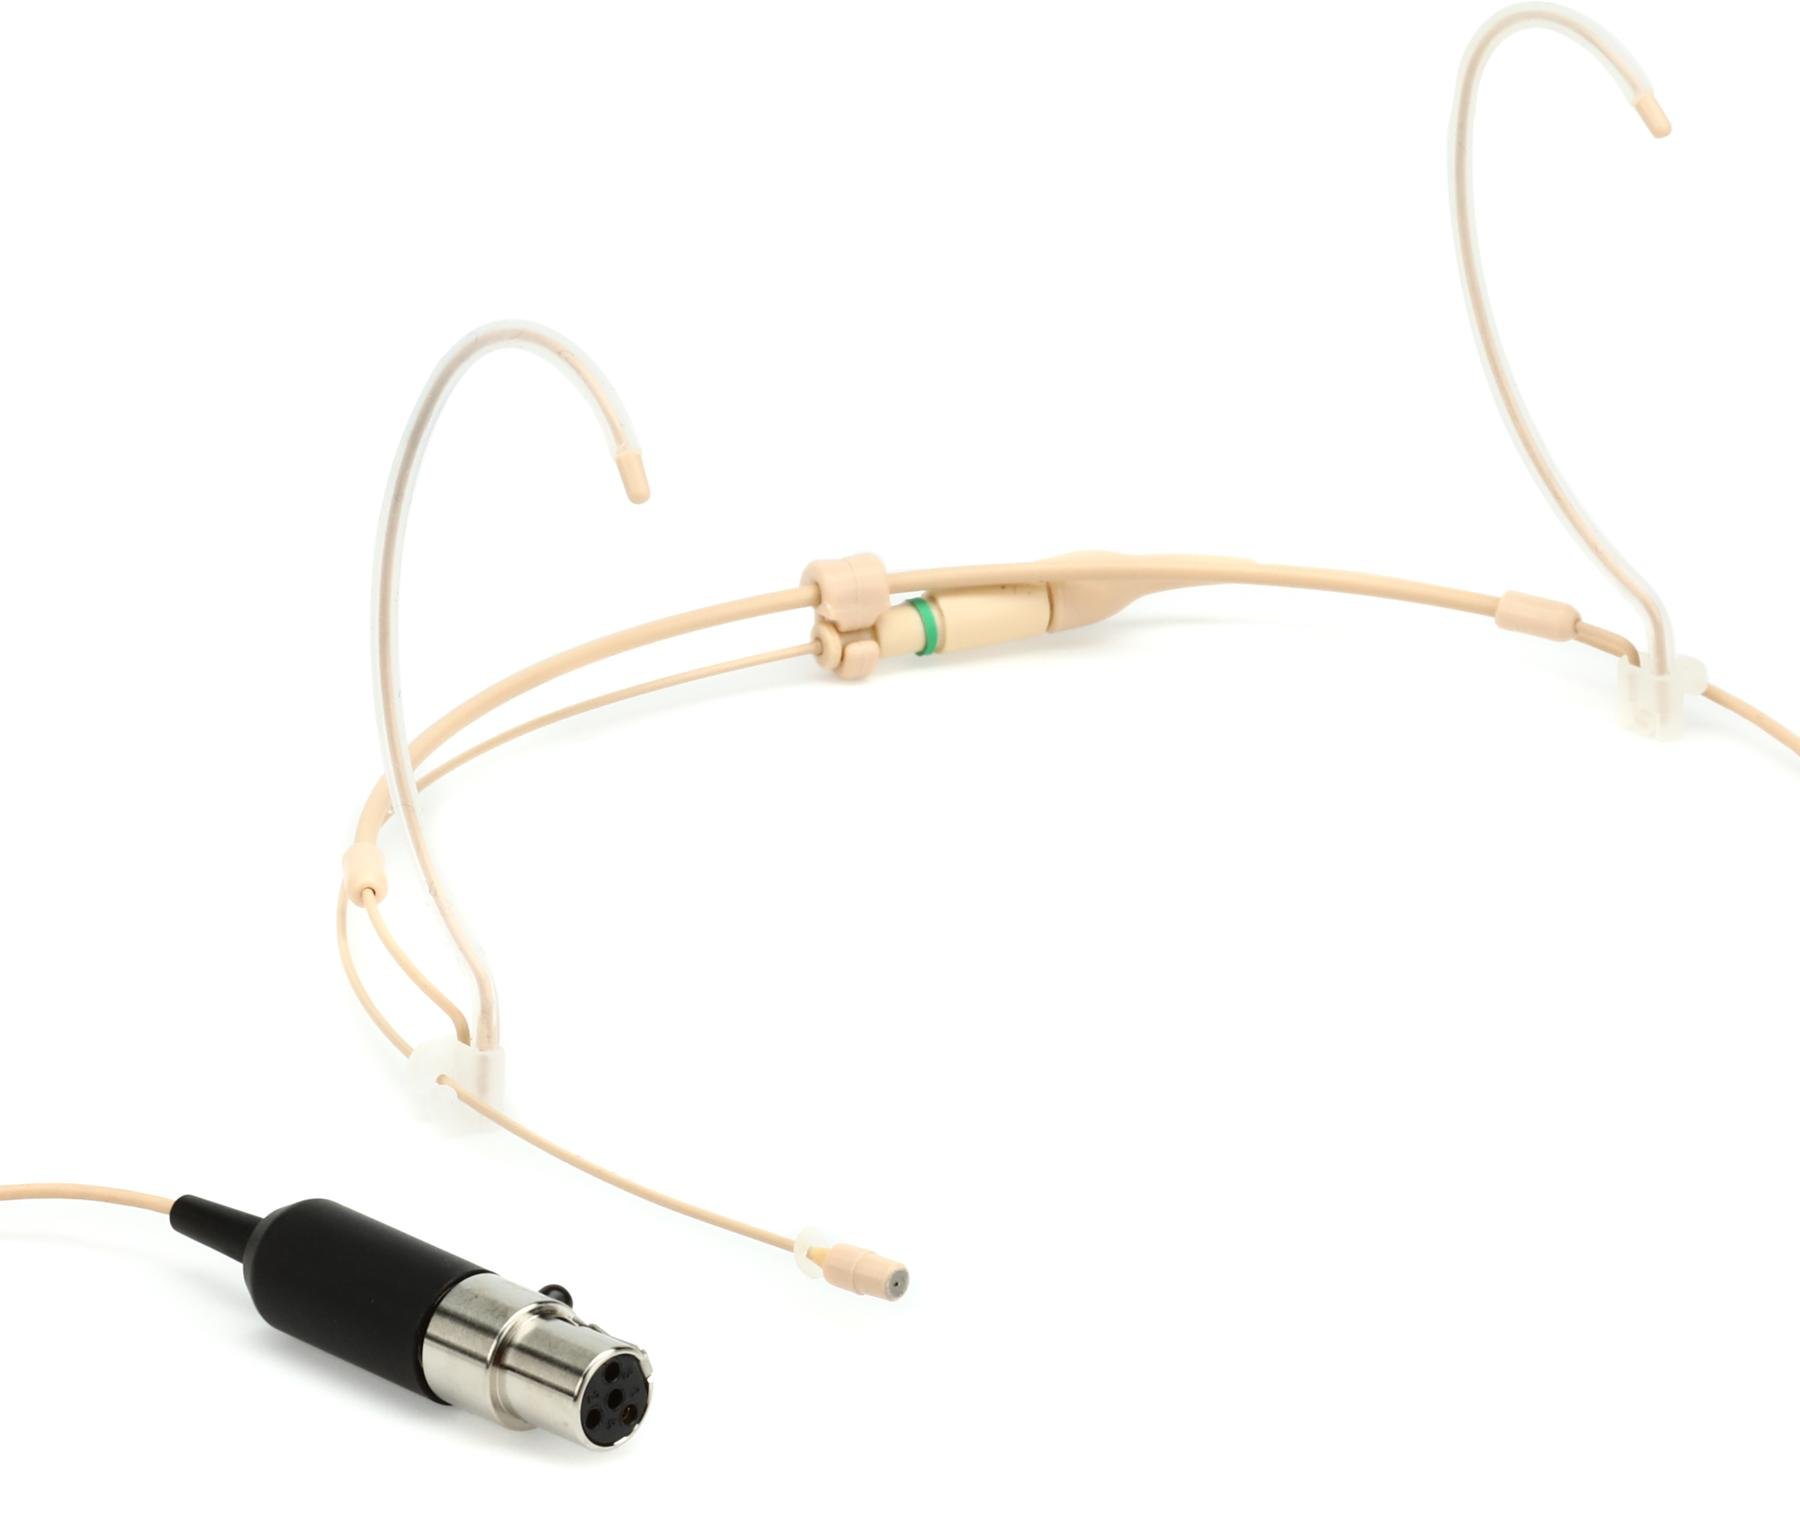 Countryman H6 Directional Headset Microphone for Speaking with SL Connector  for Shure Wireless - Light Beige